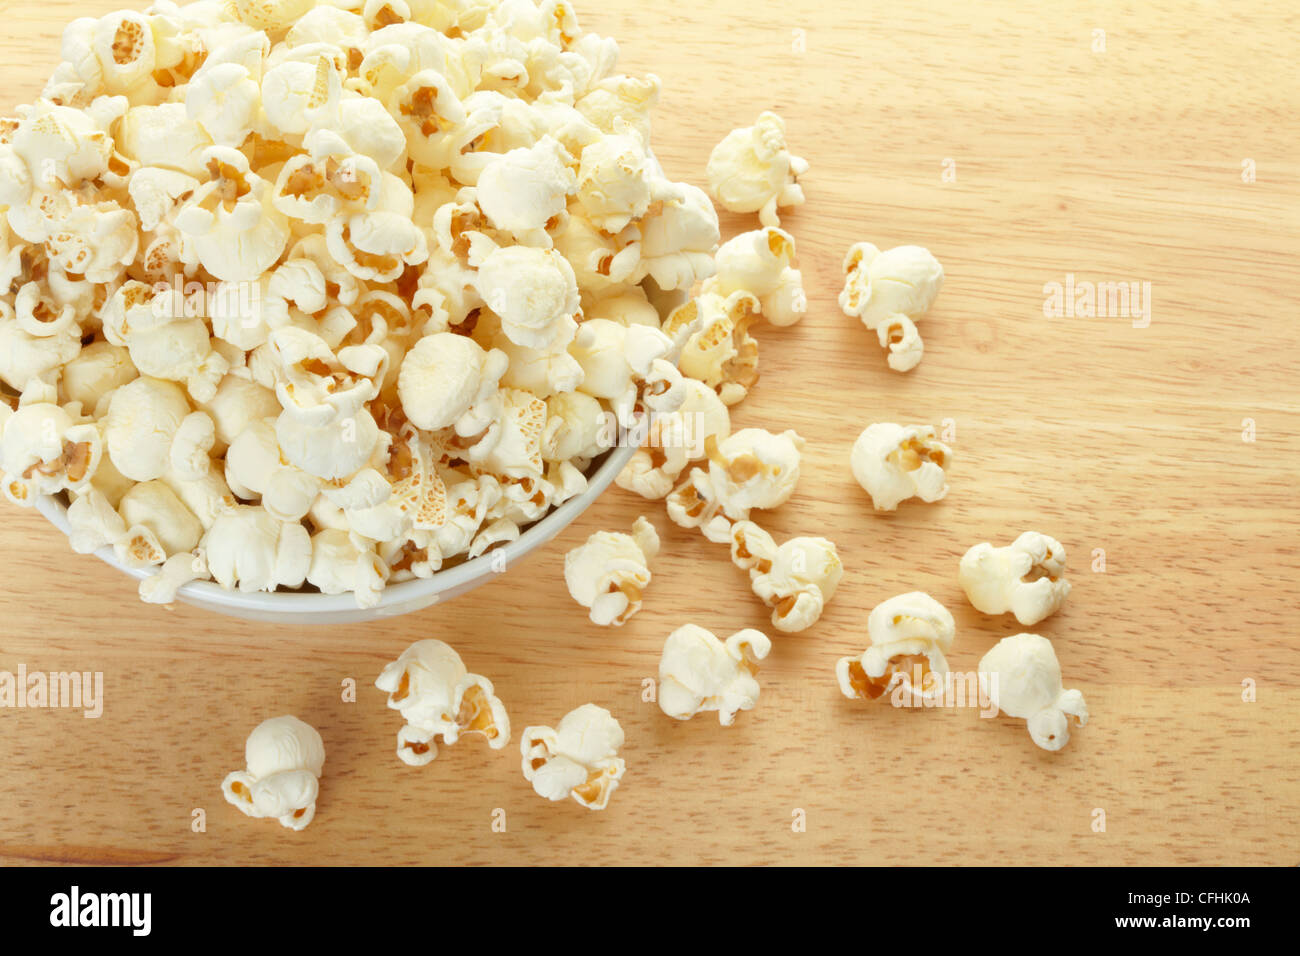 Popcorn bowl on wooden table background Stock Photo